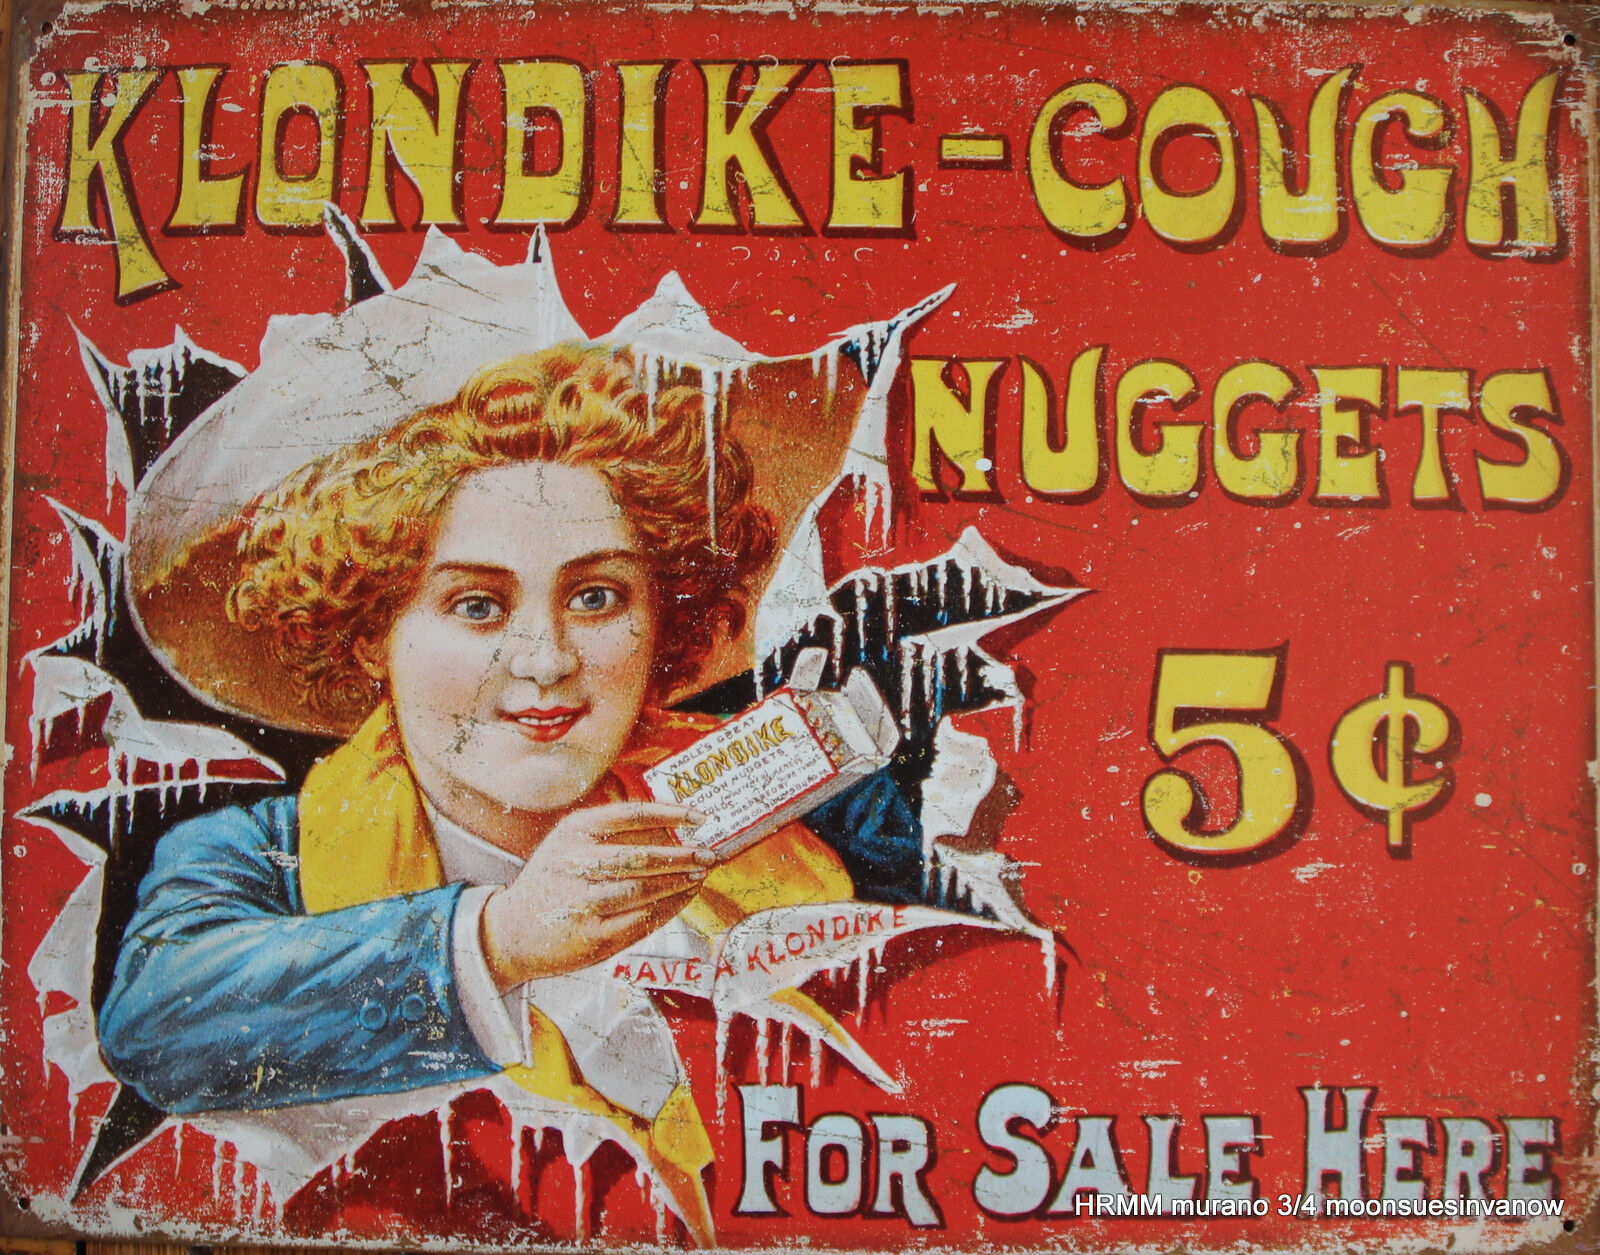 Klondike Cough Nuggets For Sale Here Ad Tin Sign Vintage Advertising Decor  